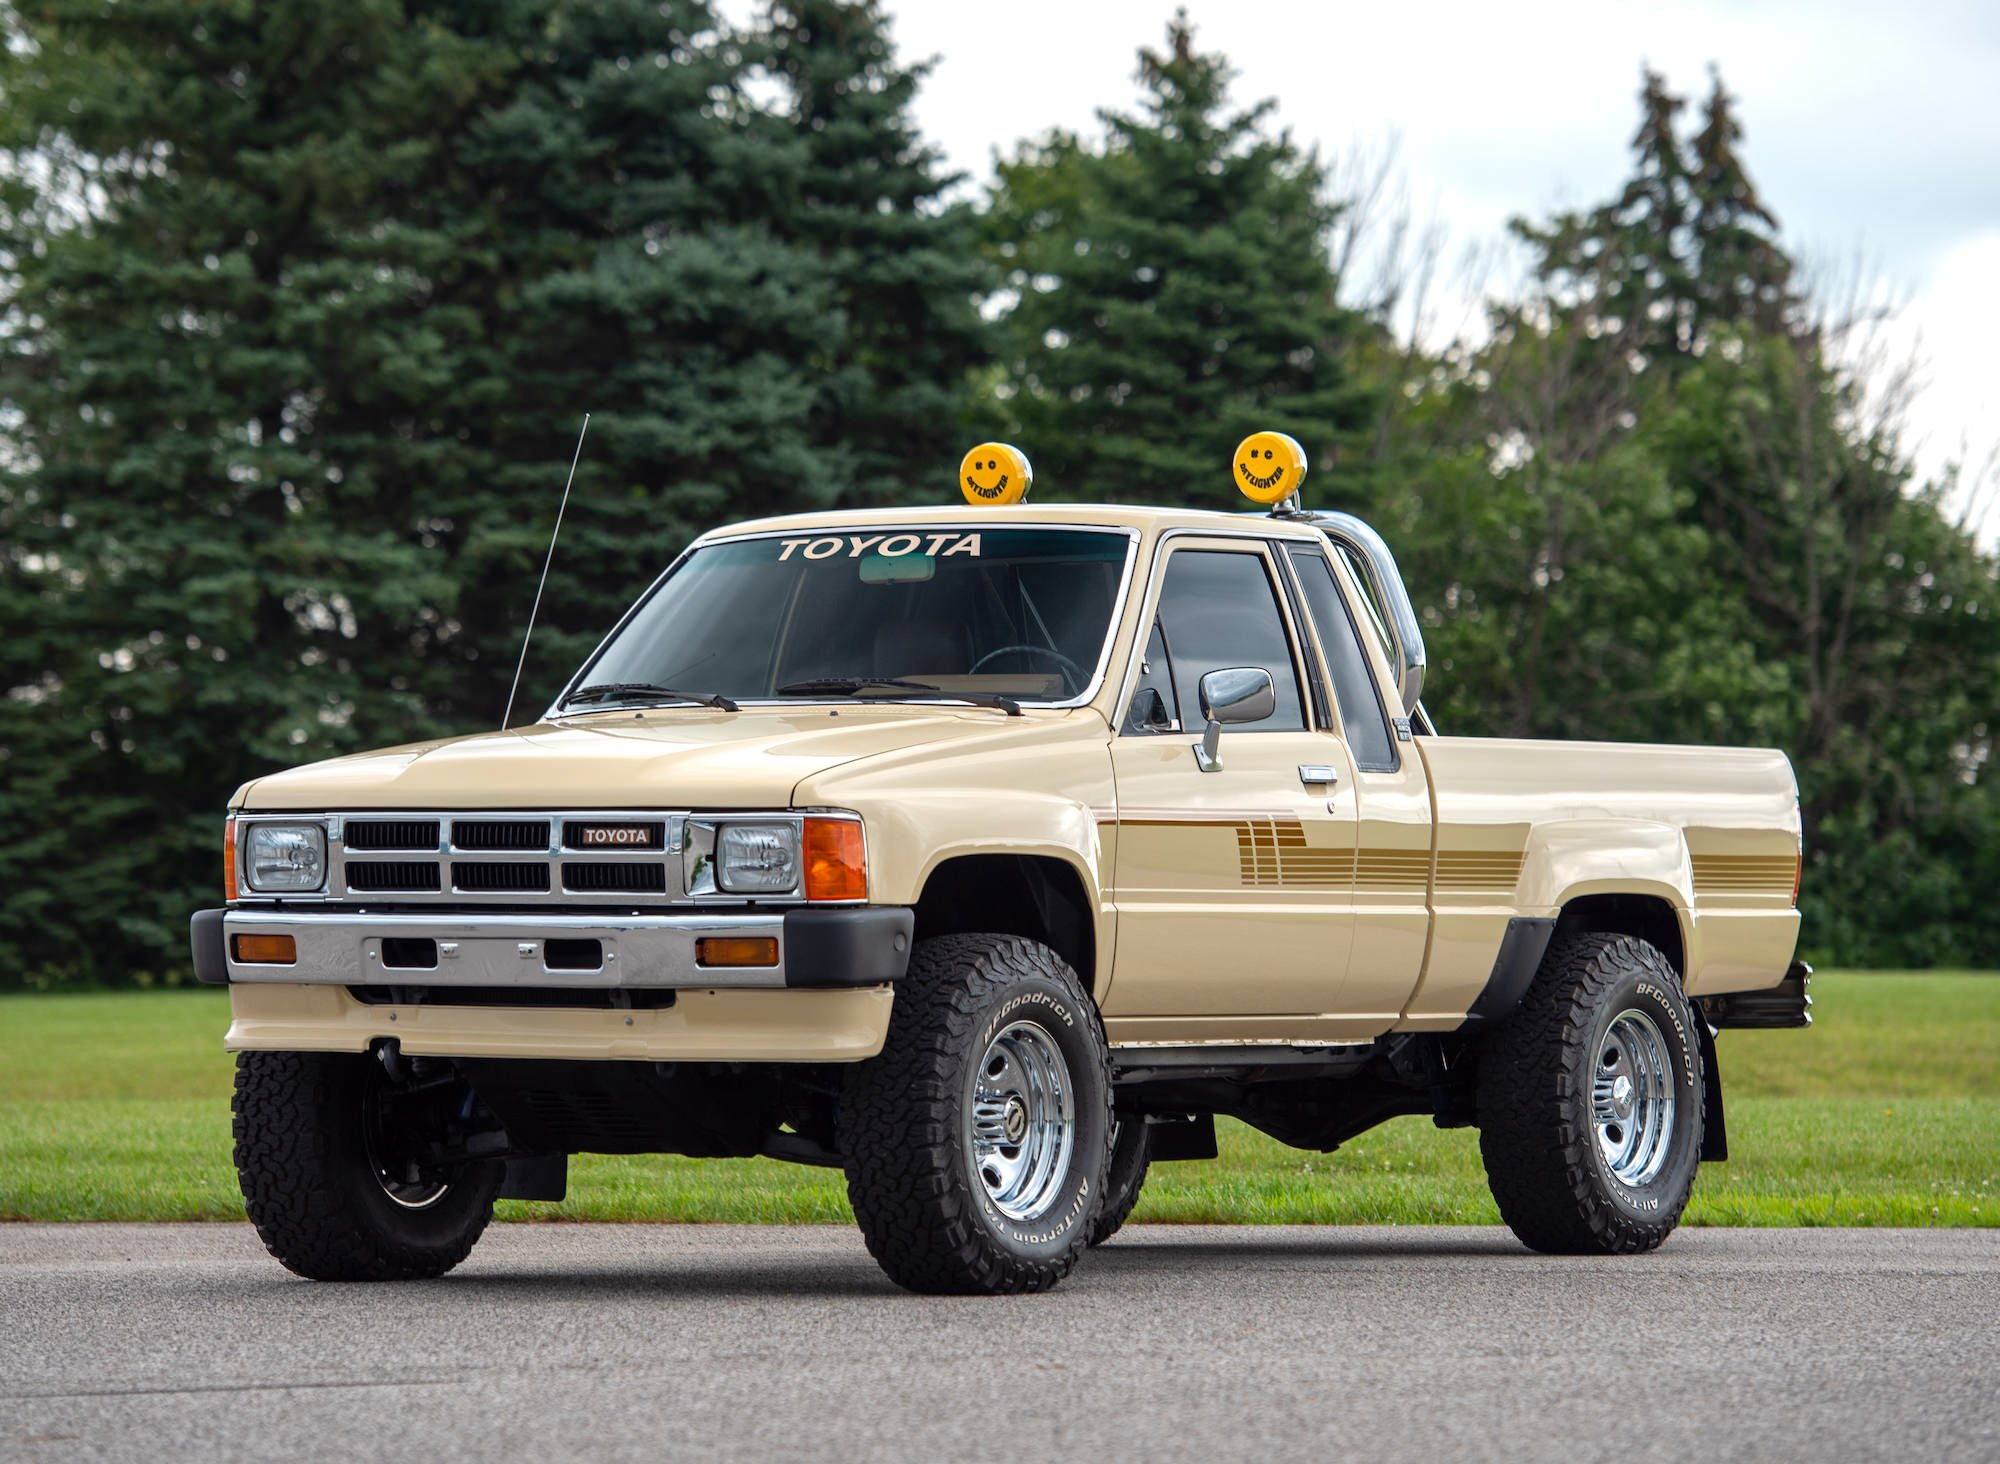 For Sale: An Iconic 1986 Toyota 4×4 Xtracab Pickup via @Silodrome